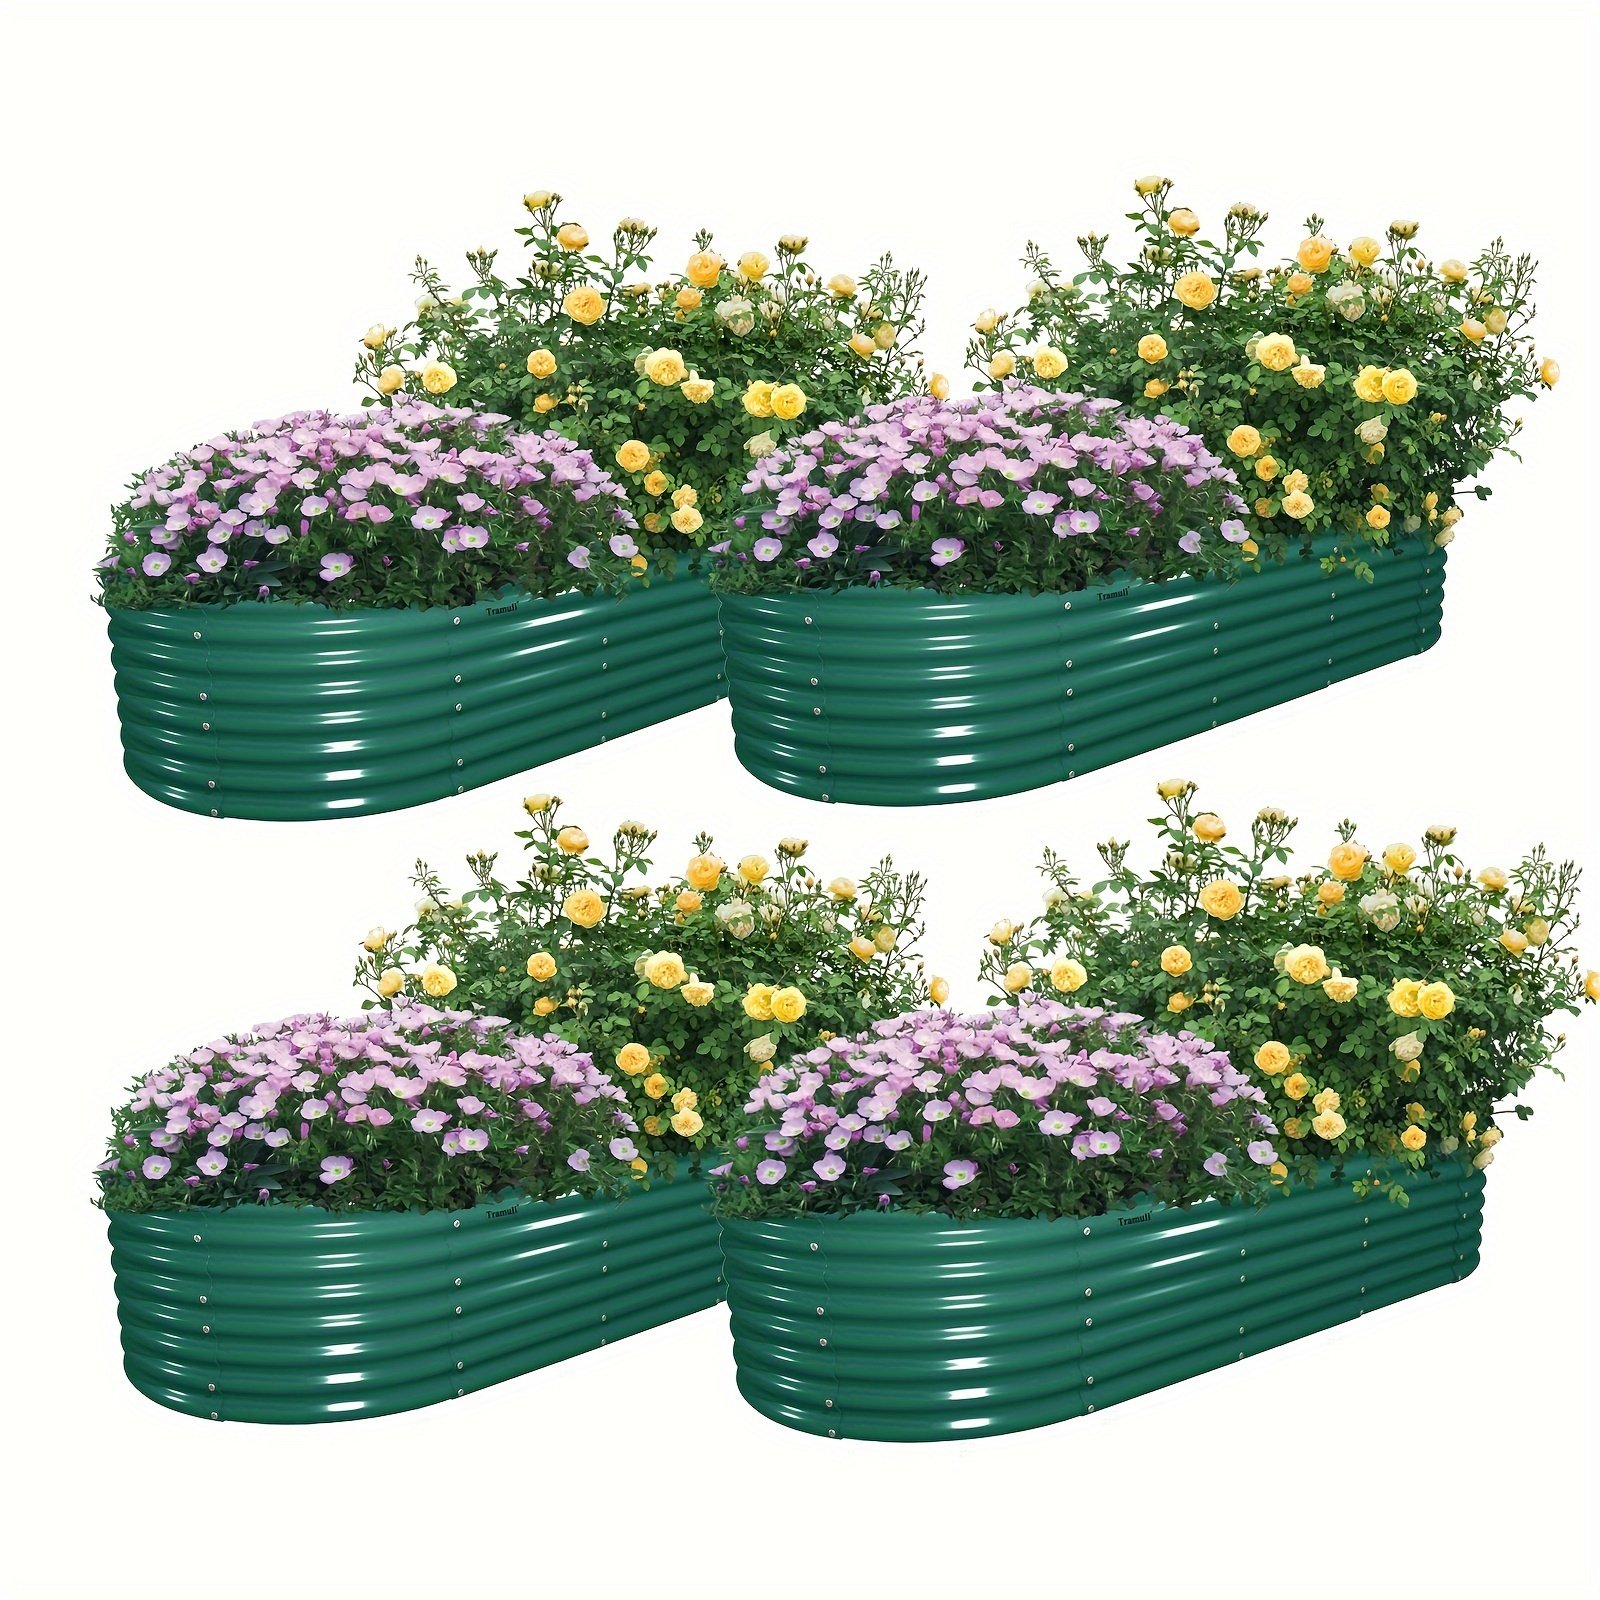 

2/4/6pcs 8x3x2ft Galvanized Raised Garden Bed Kit, Oval Metal Ground Planter Box, Outdoor Bottomless Planter, Raised Beds For Vegetables Flowers Herbs Fruits